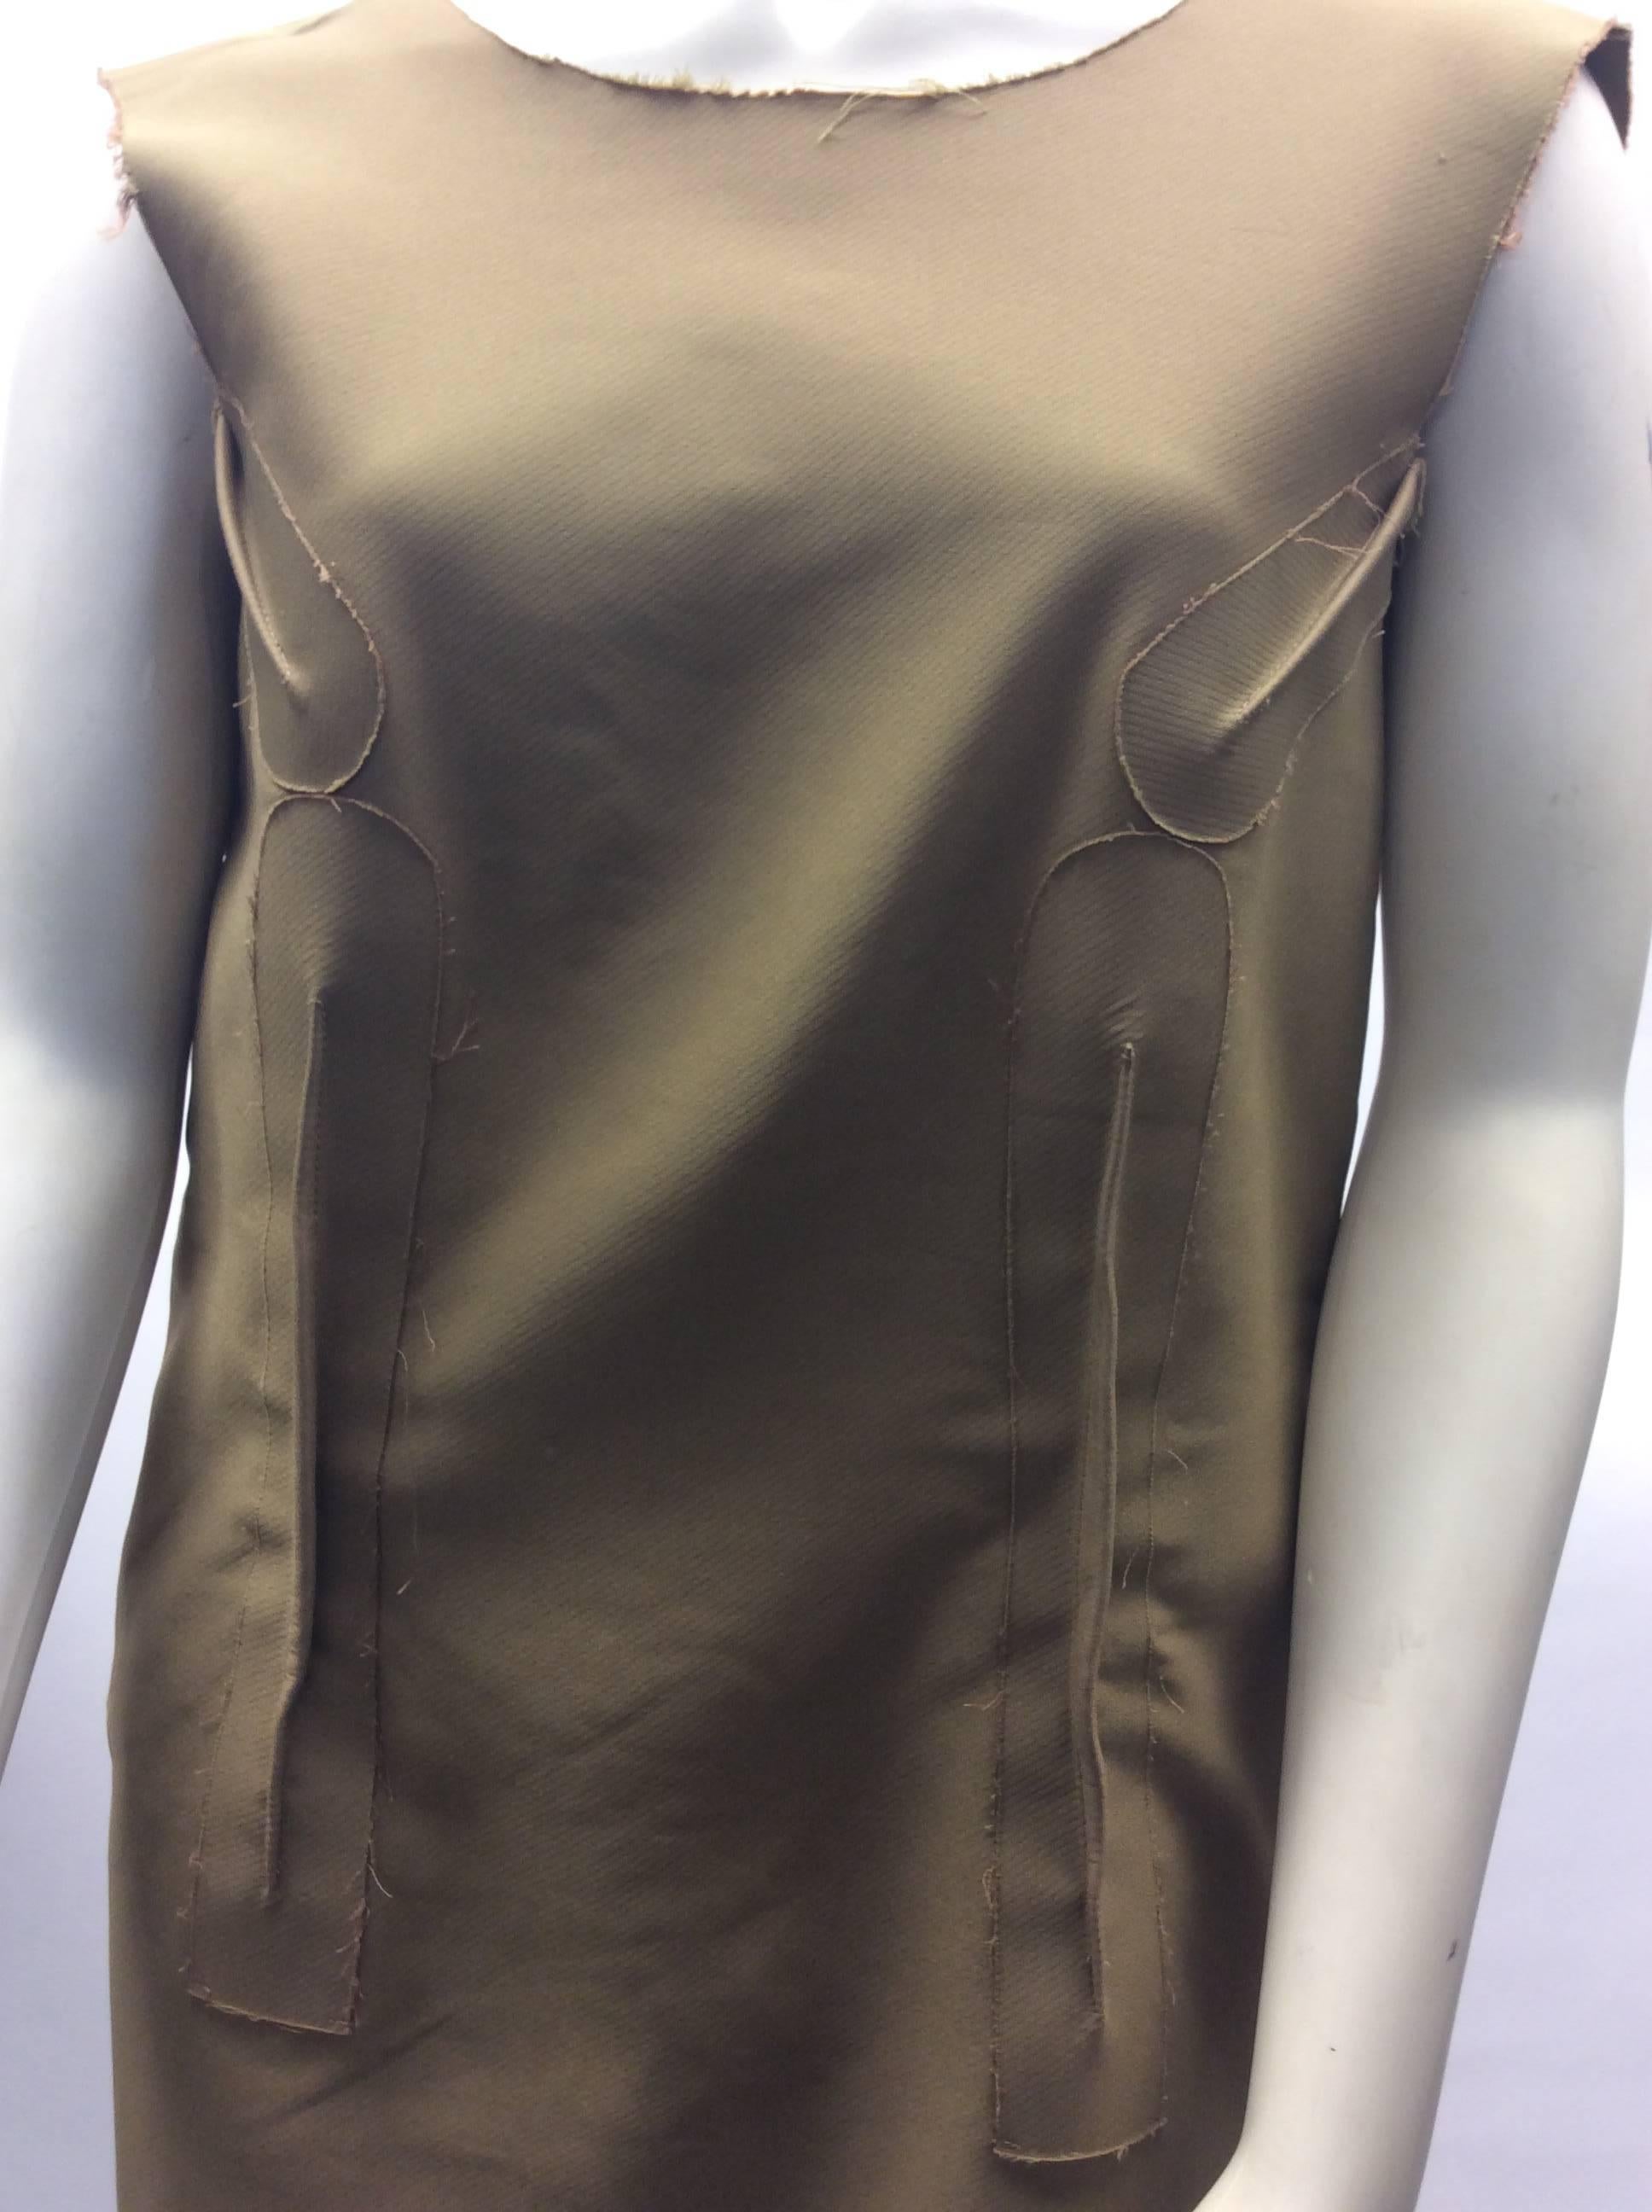 Marni Khaki Frayed Shift Dress
Made in Italy 
Size 38
Made out of cotton/nylon/elastane
Pockets in front with intentional frayed trim and piping 
